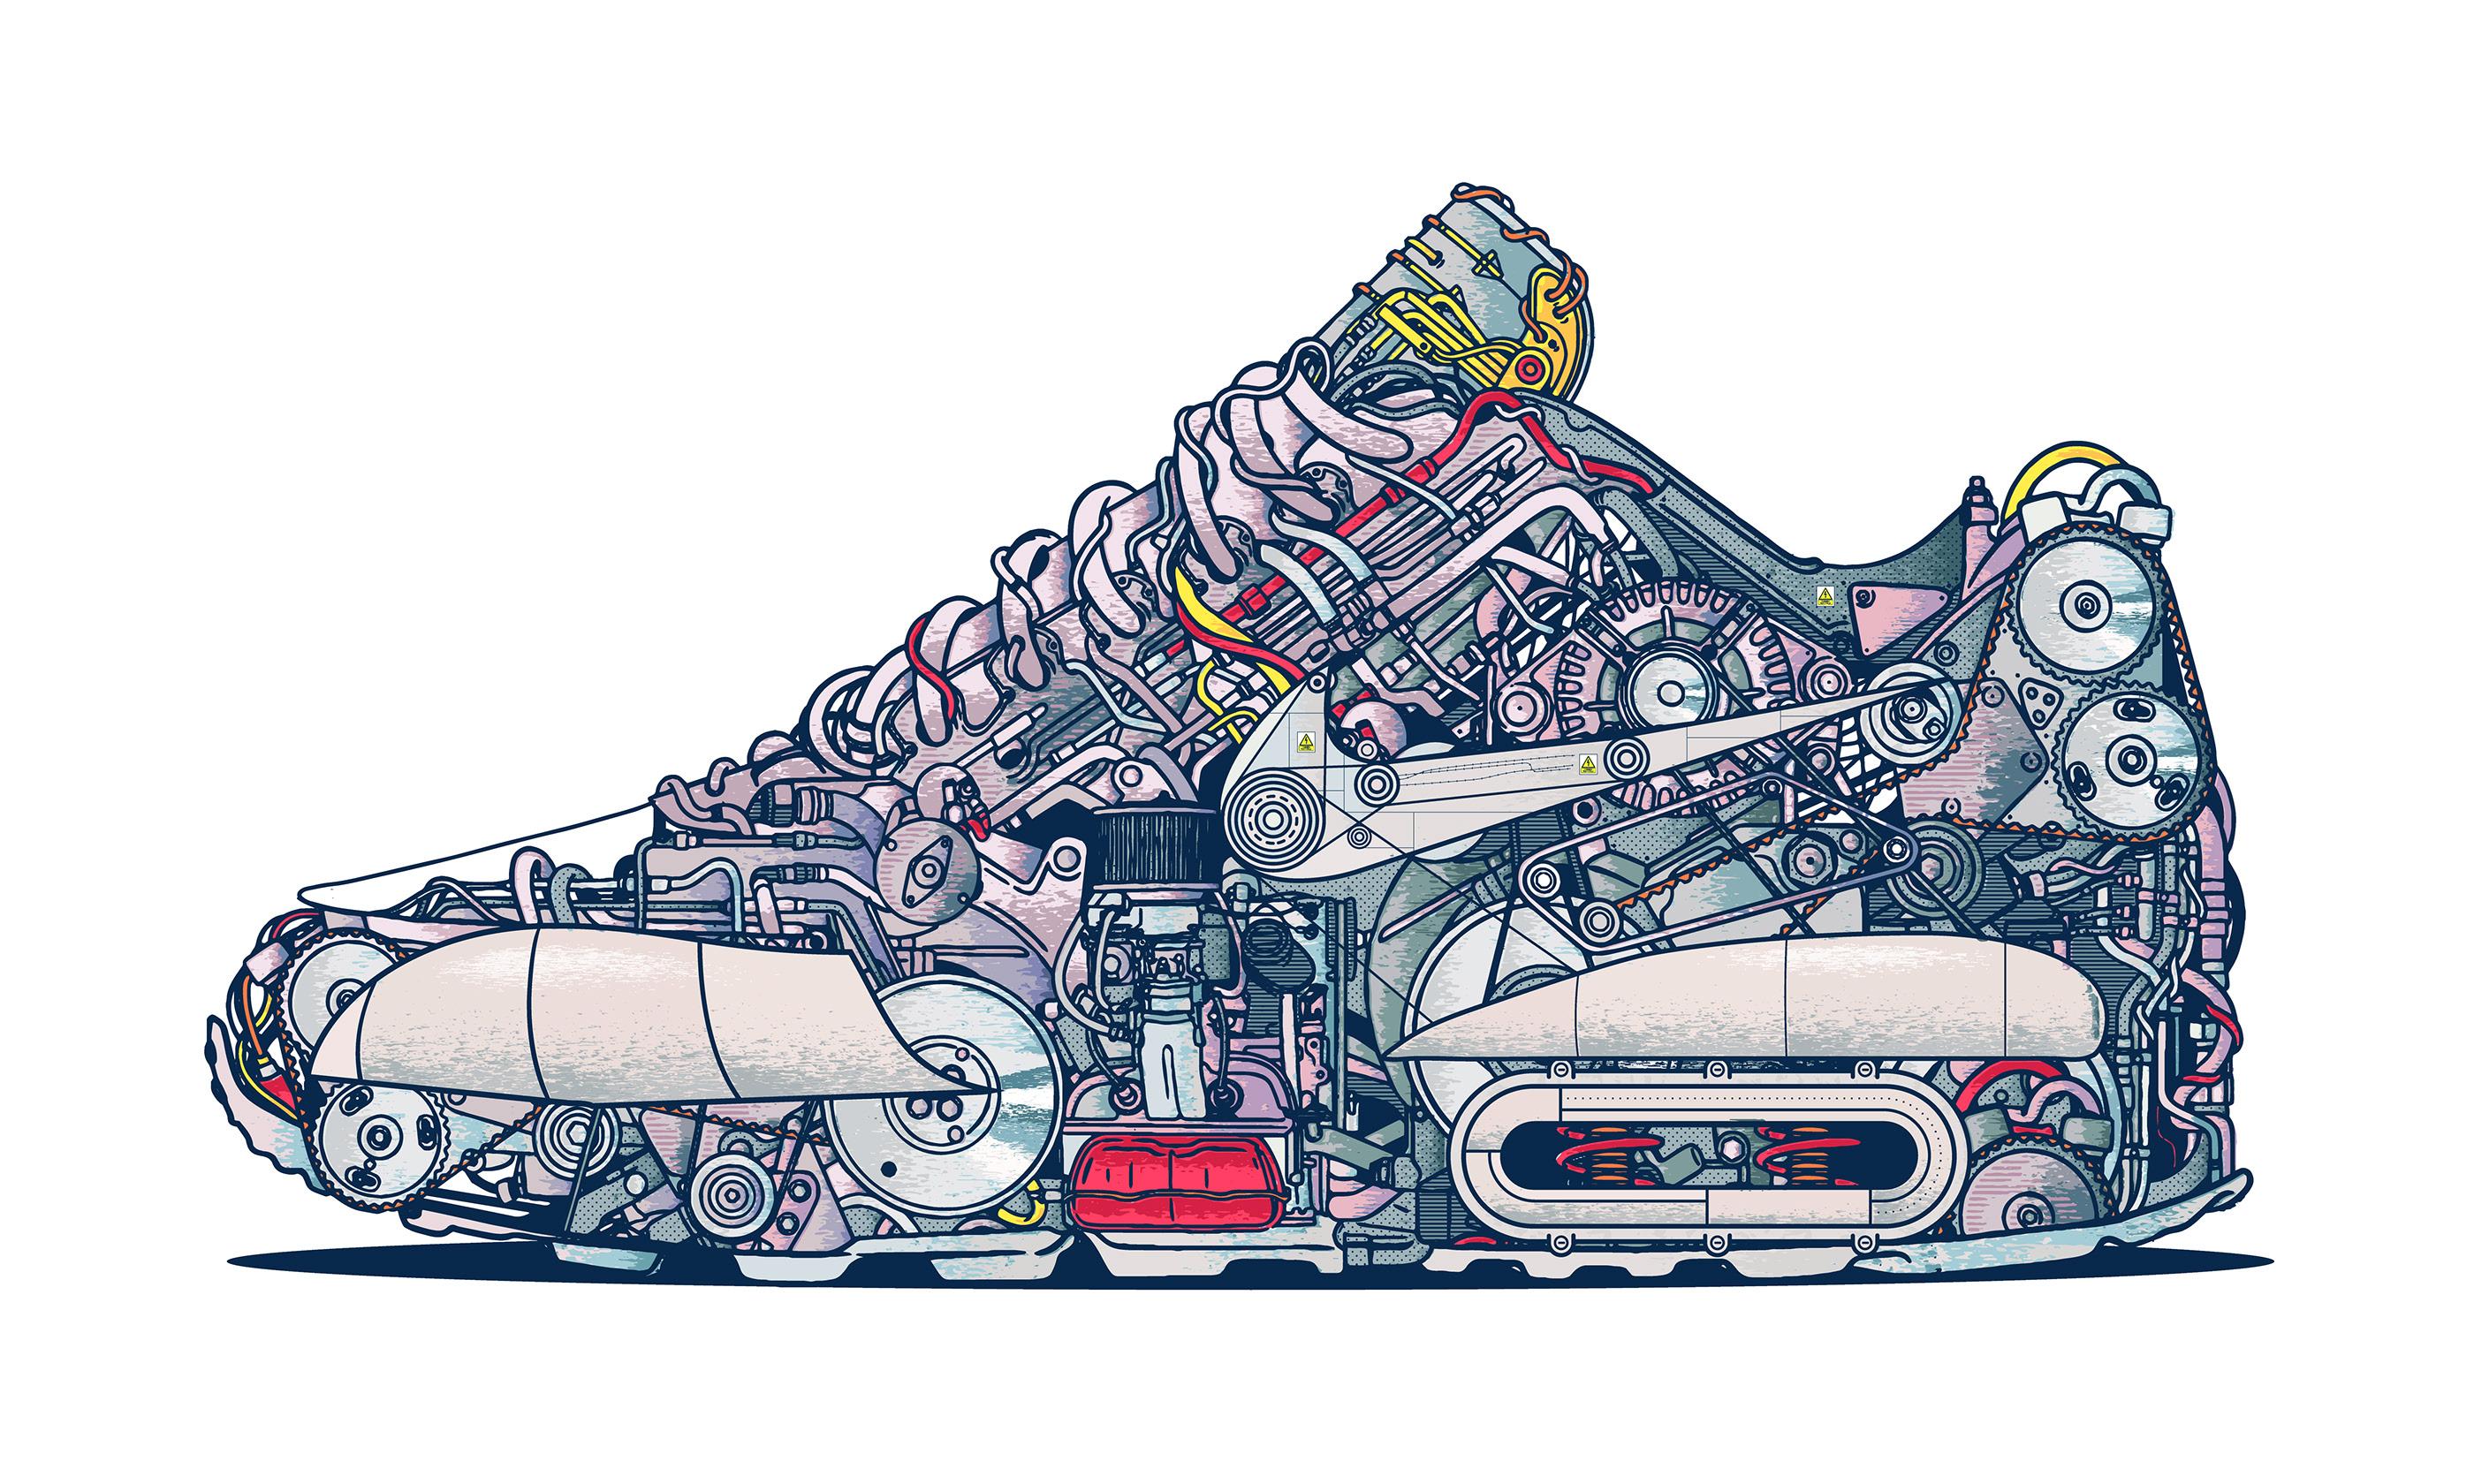 2800 x 1680 · png - Pin by Sirup on illustrate in 2020 | Sneaker posters, Nike art ...